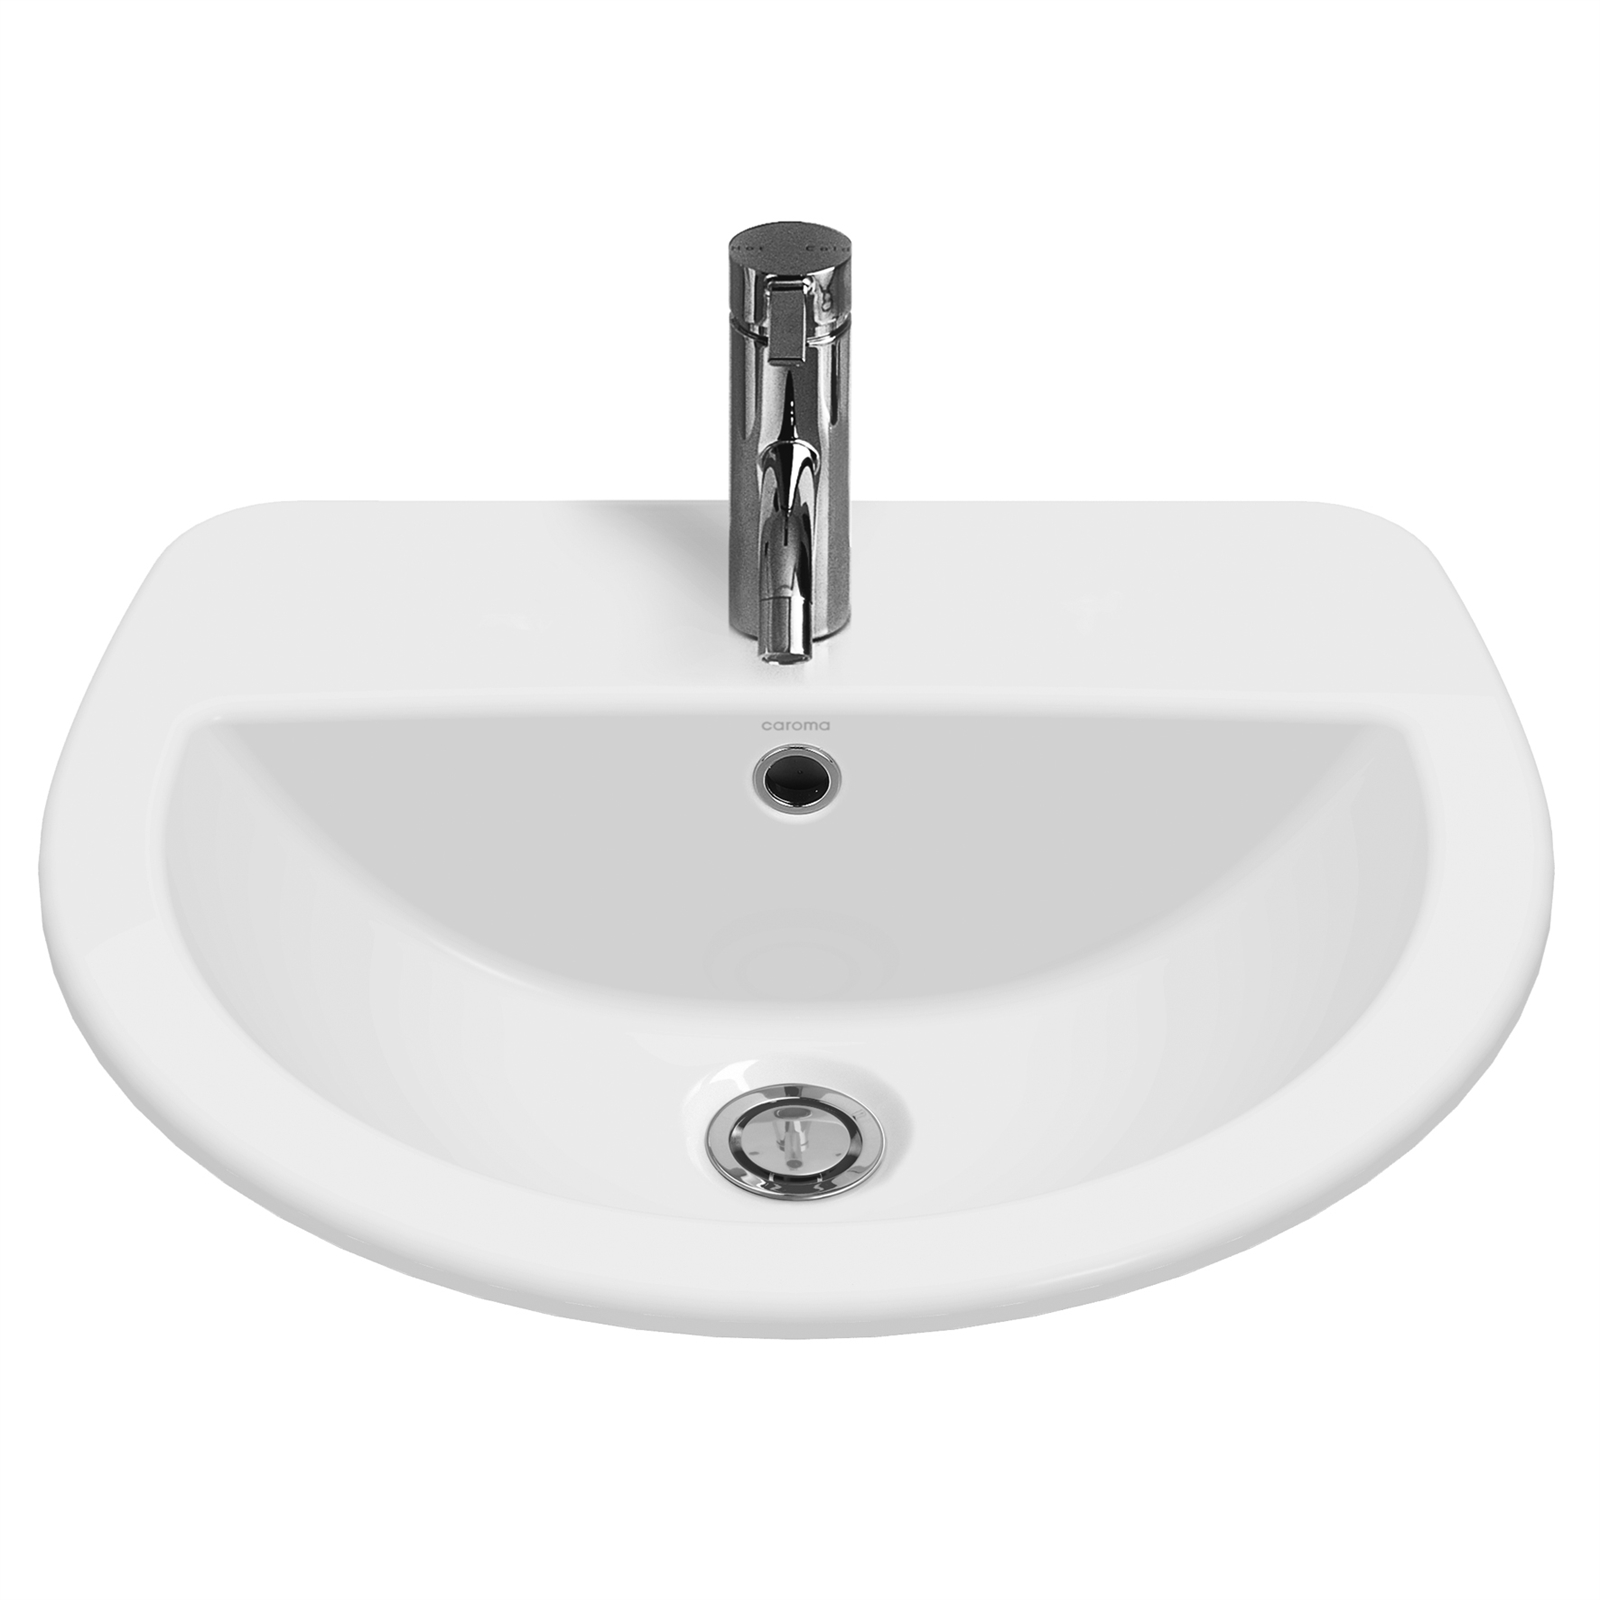 Caroma White Cosmo Vanity Basin With 3 Tap Holes